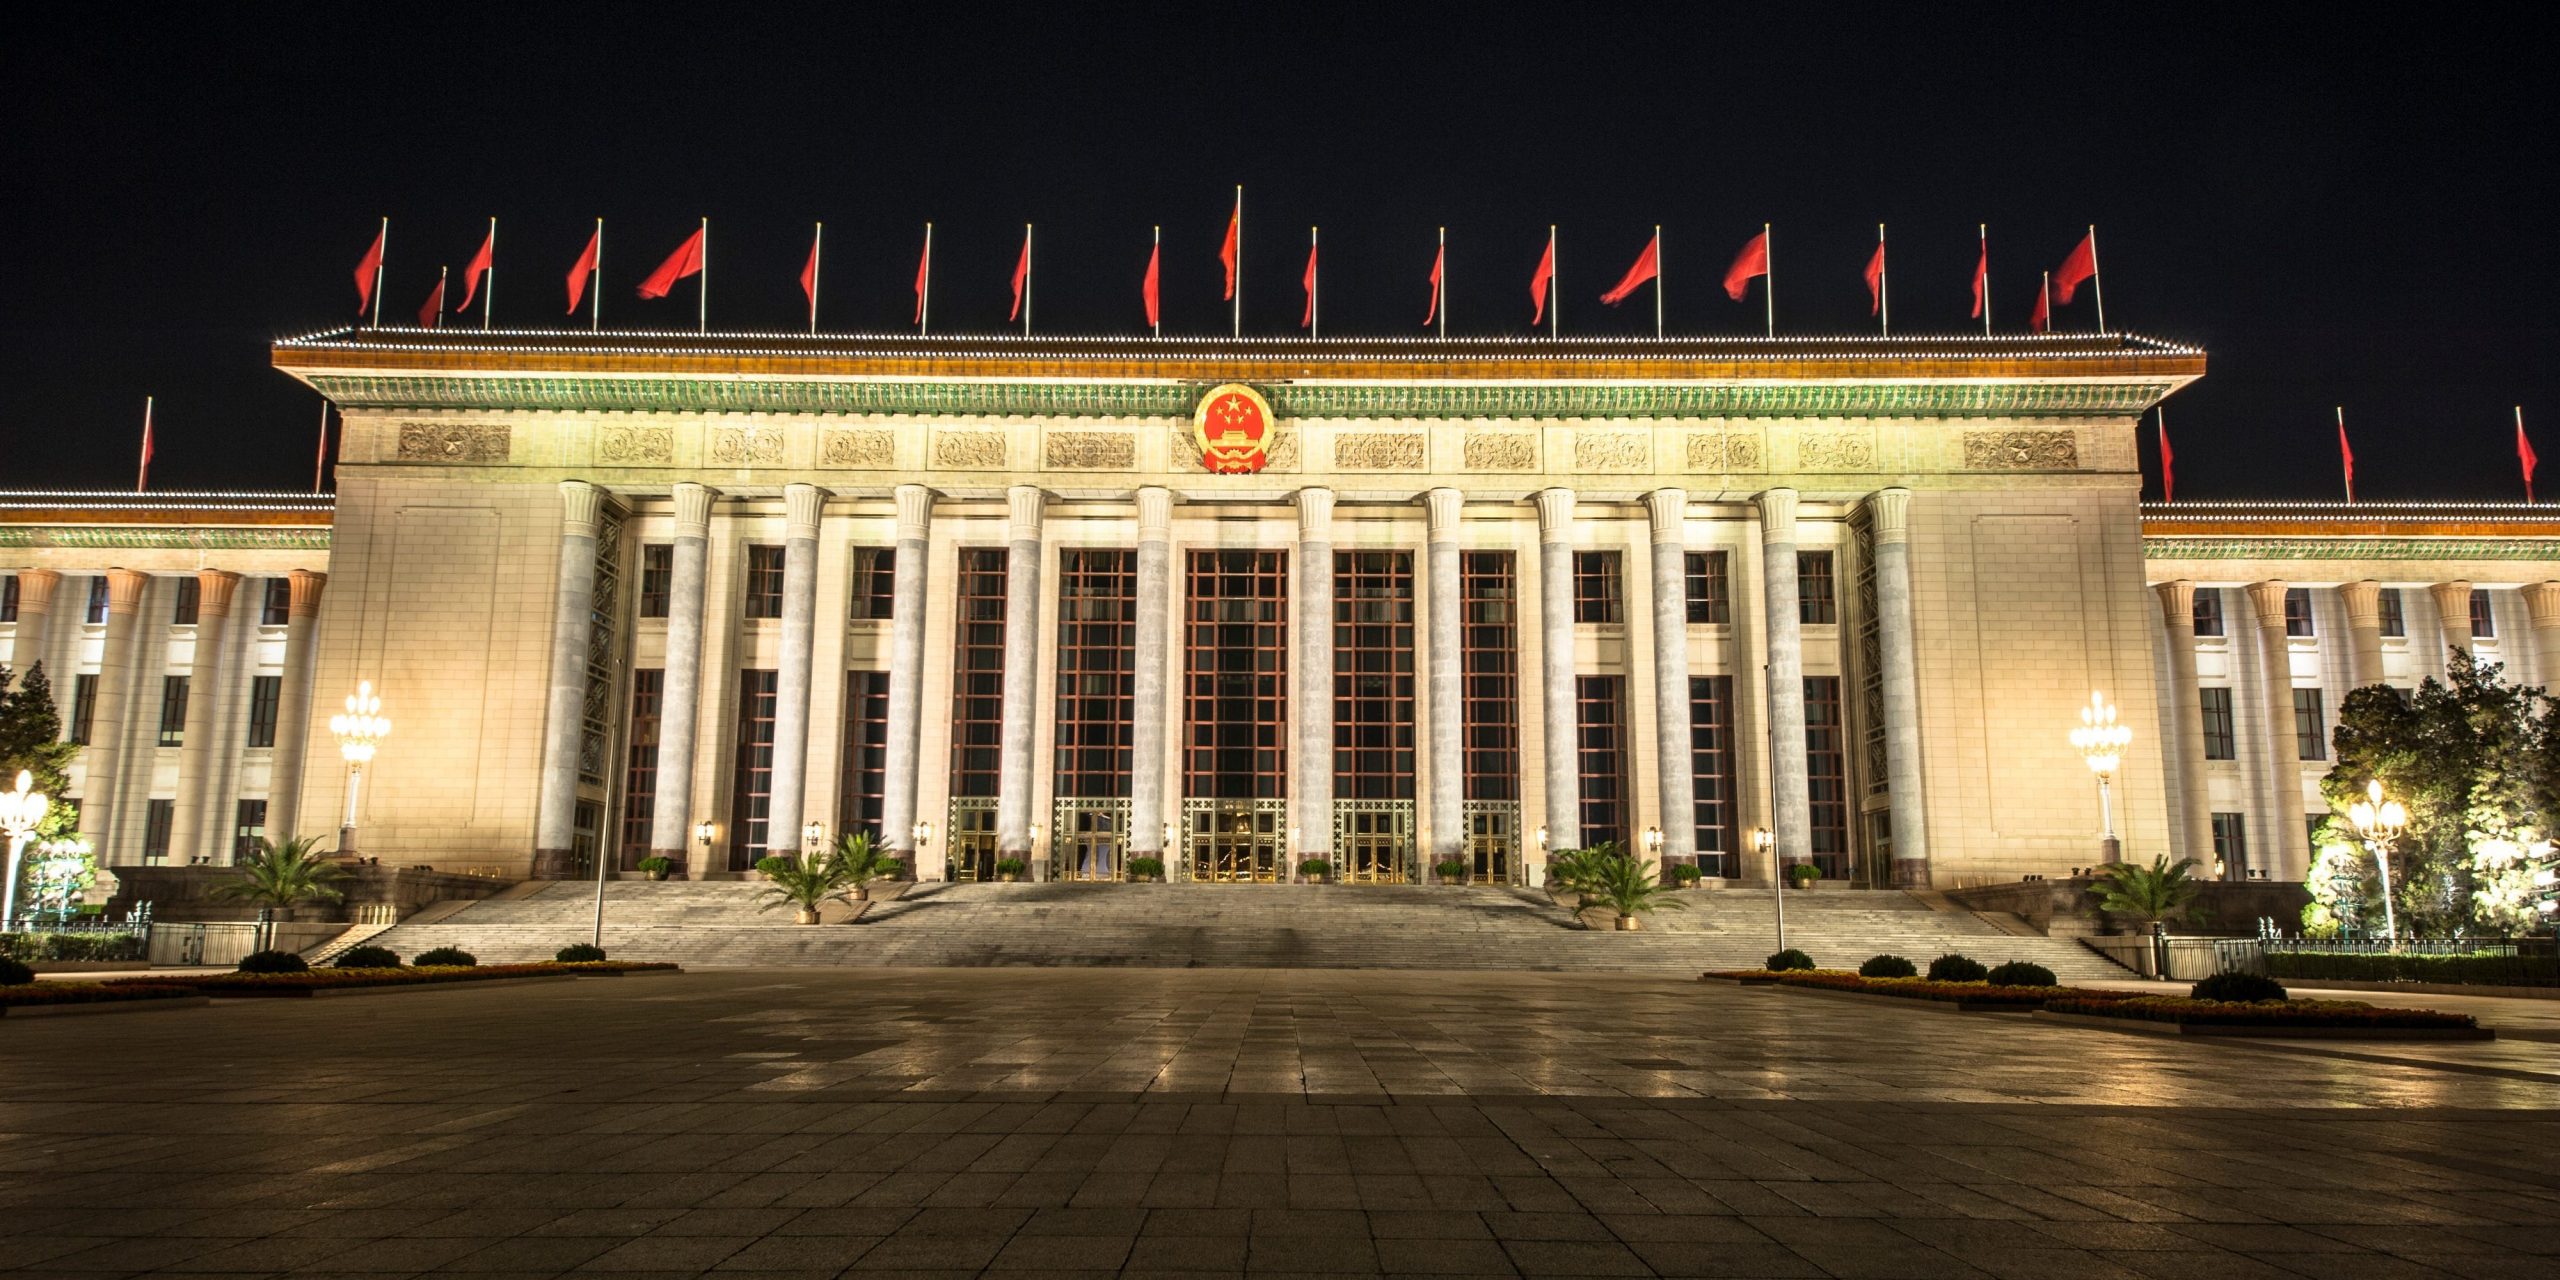 The Great Hall of the People in the night, located at the east side of Tiananmen Square